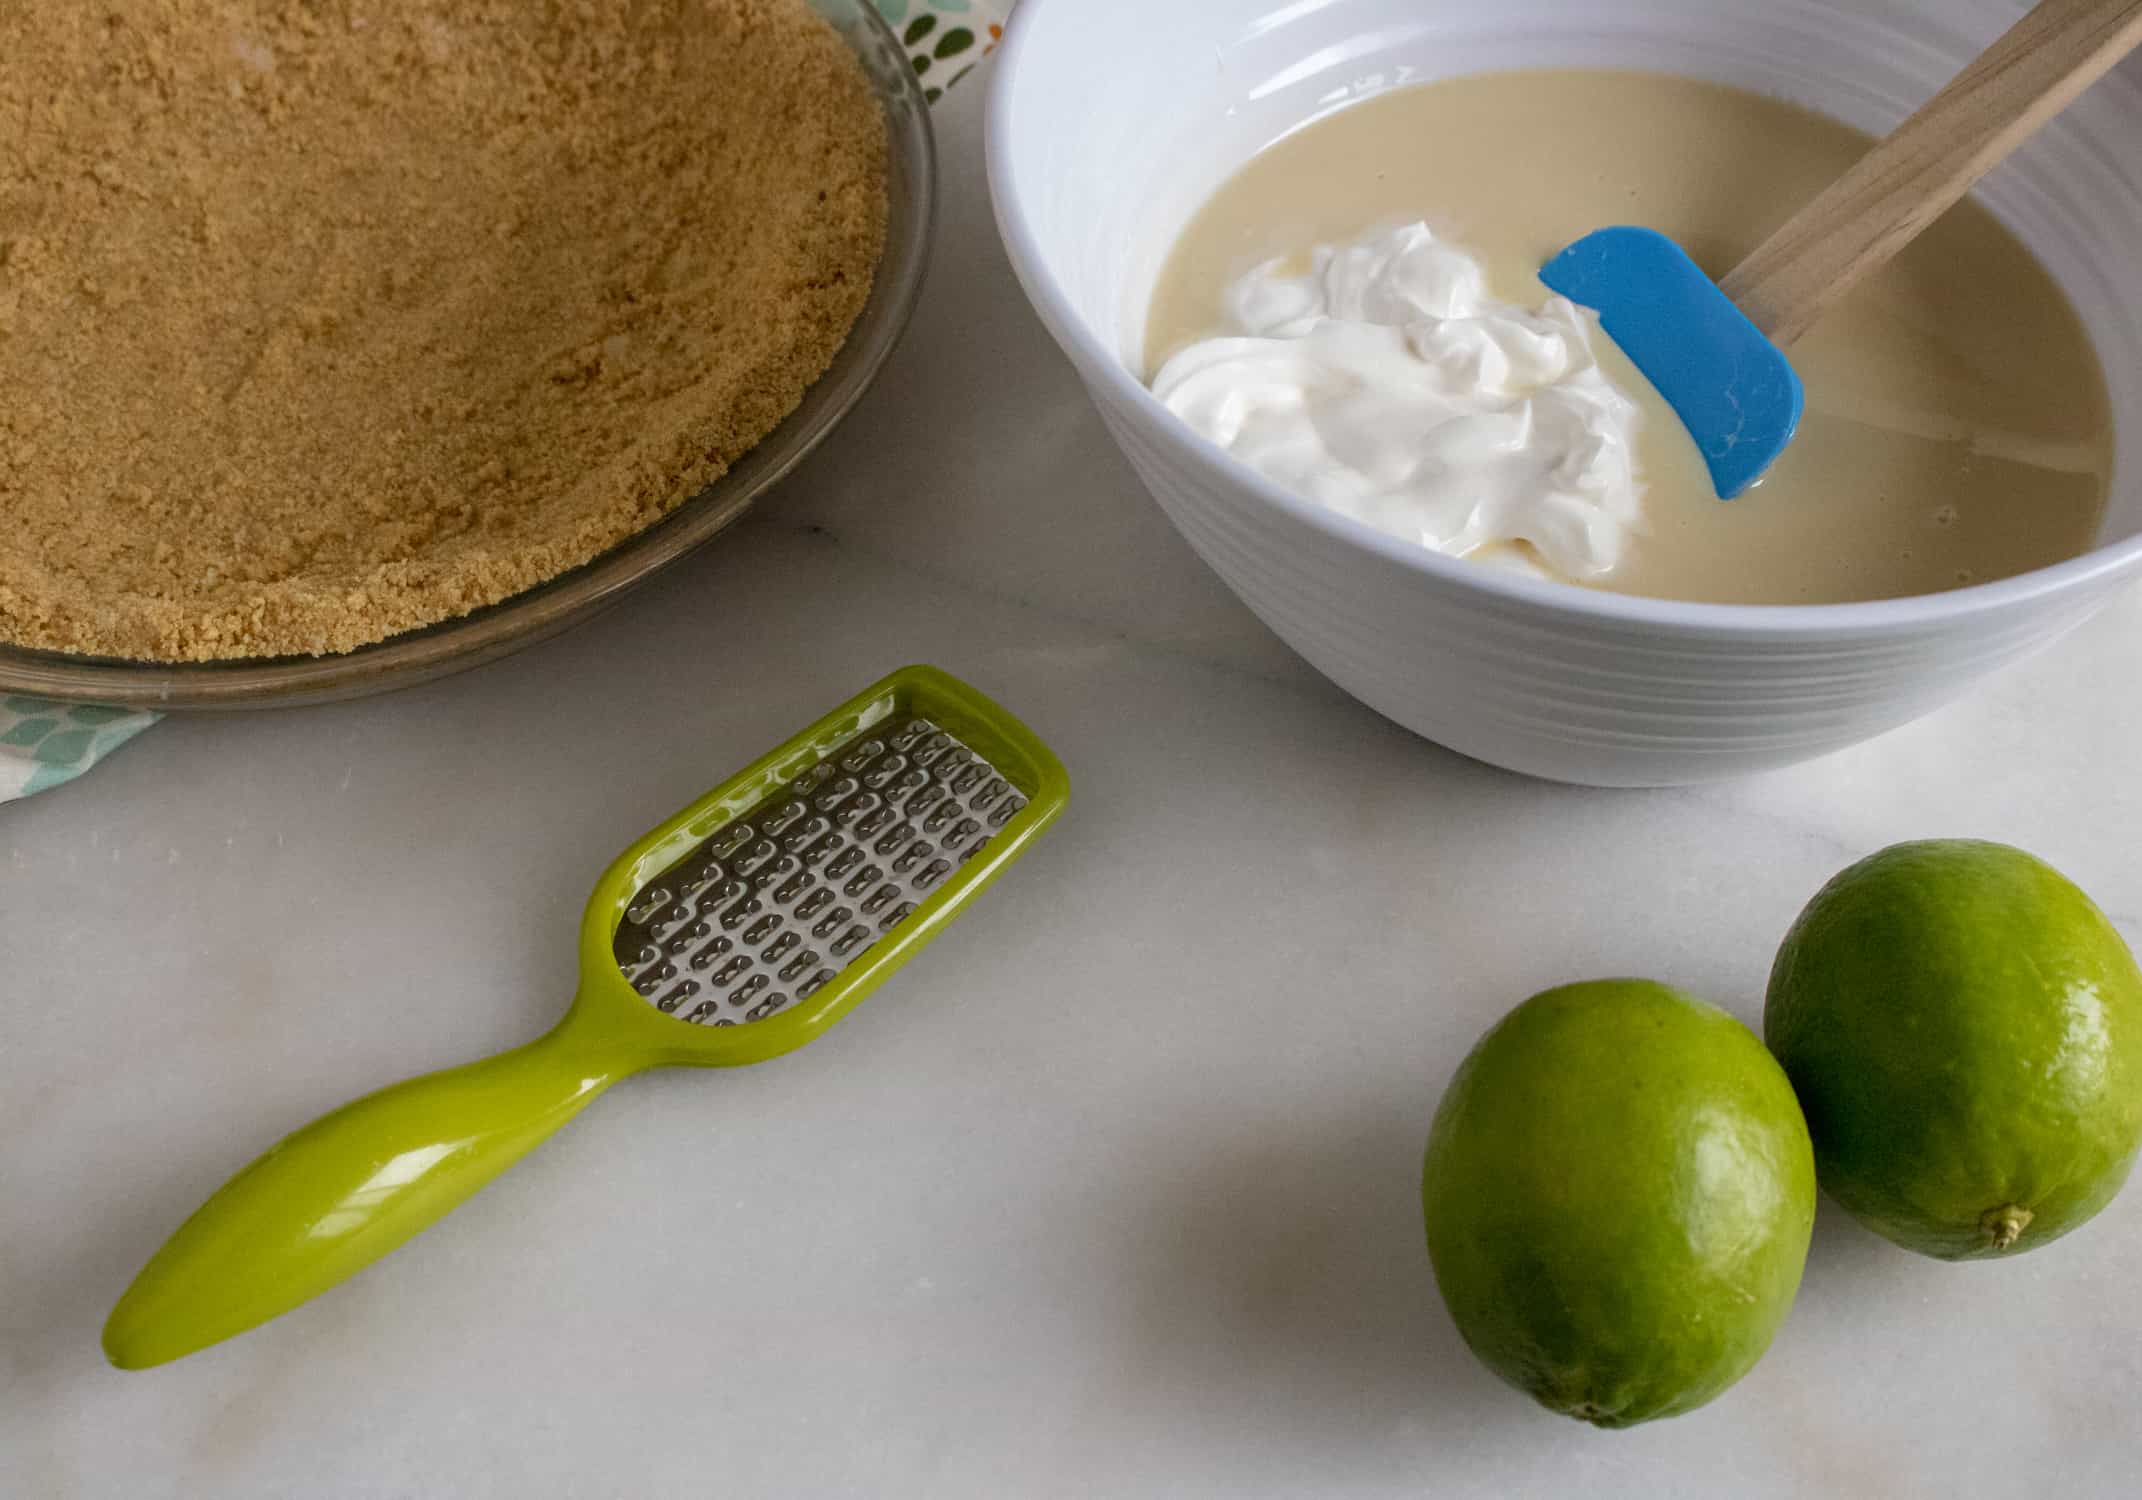 Graham cracker pie crust beside a white bowl with sweetened condensed milk and sour cream. Lime zester and two limes beside the bowl